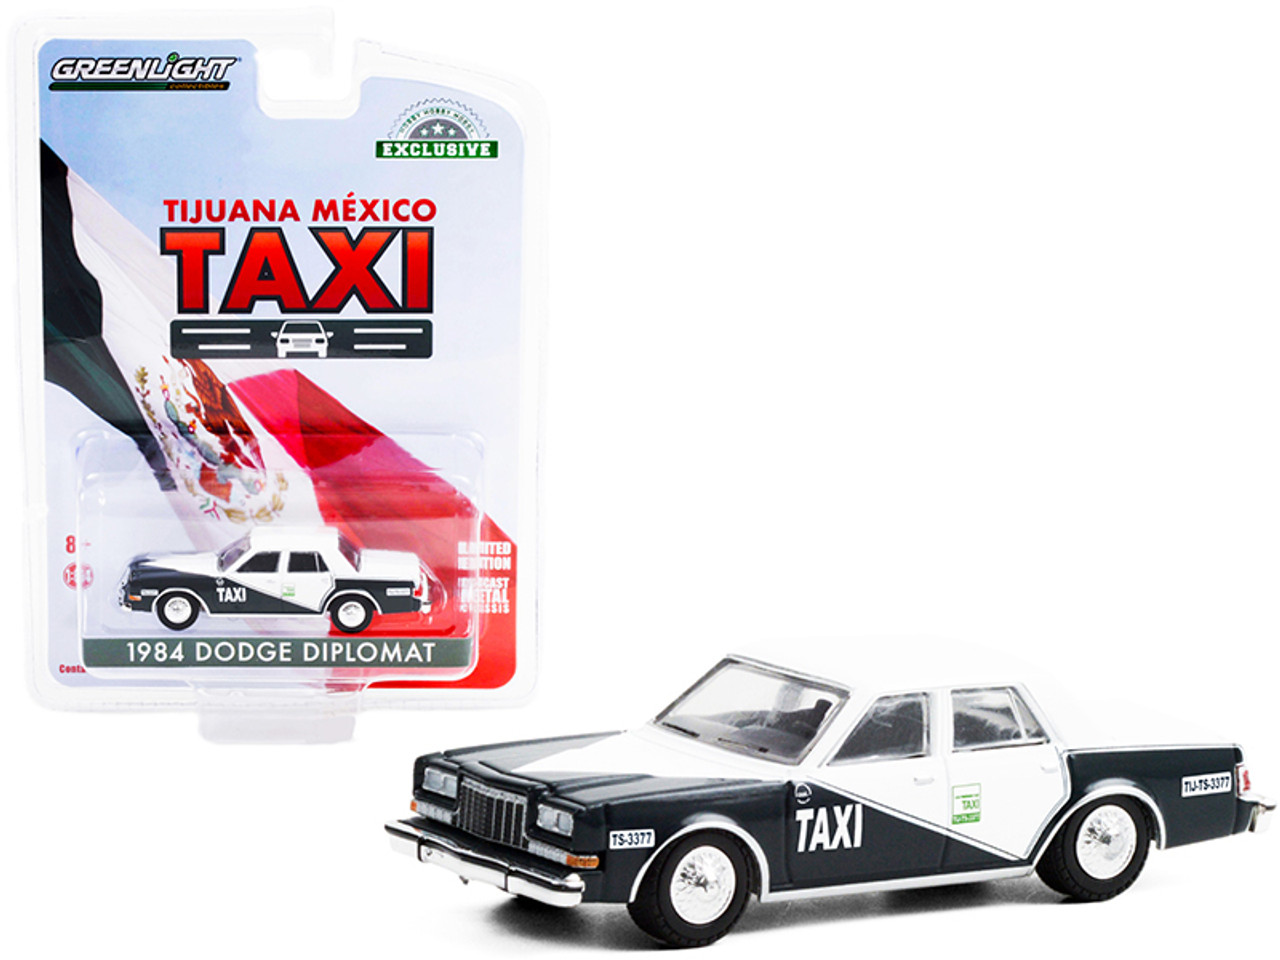 1984 Dodge Diplomat White and Dark Gray "Taxi" Tijuana (Mexico) "Hobby Exclusive" 1/64 Diecast Model Car by Greenlight